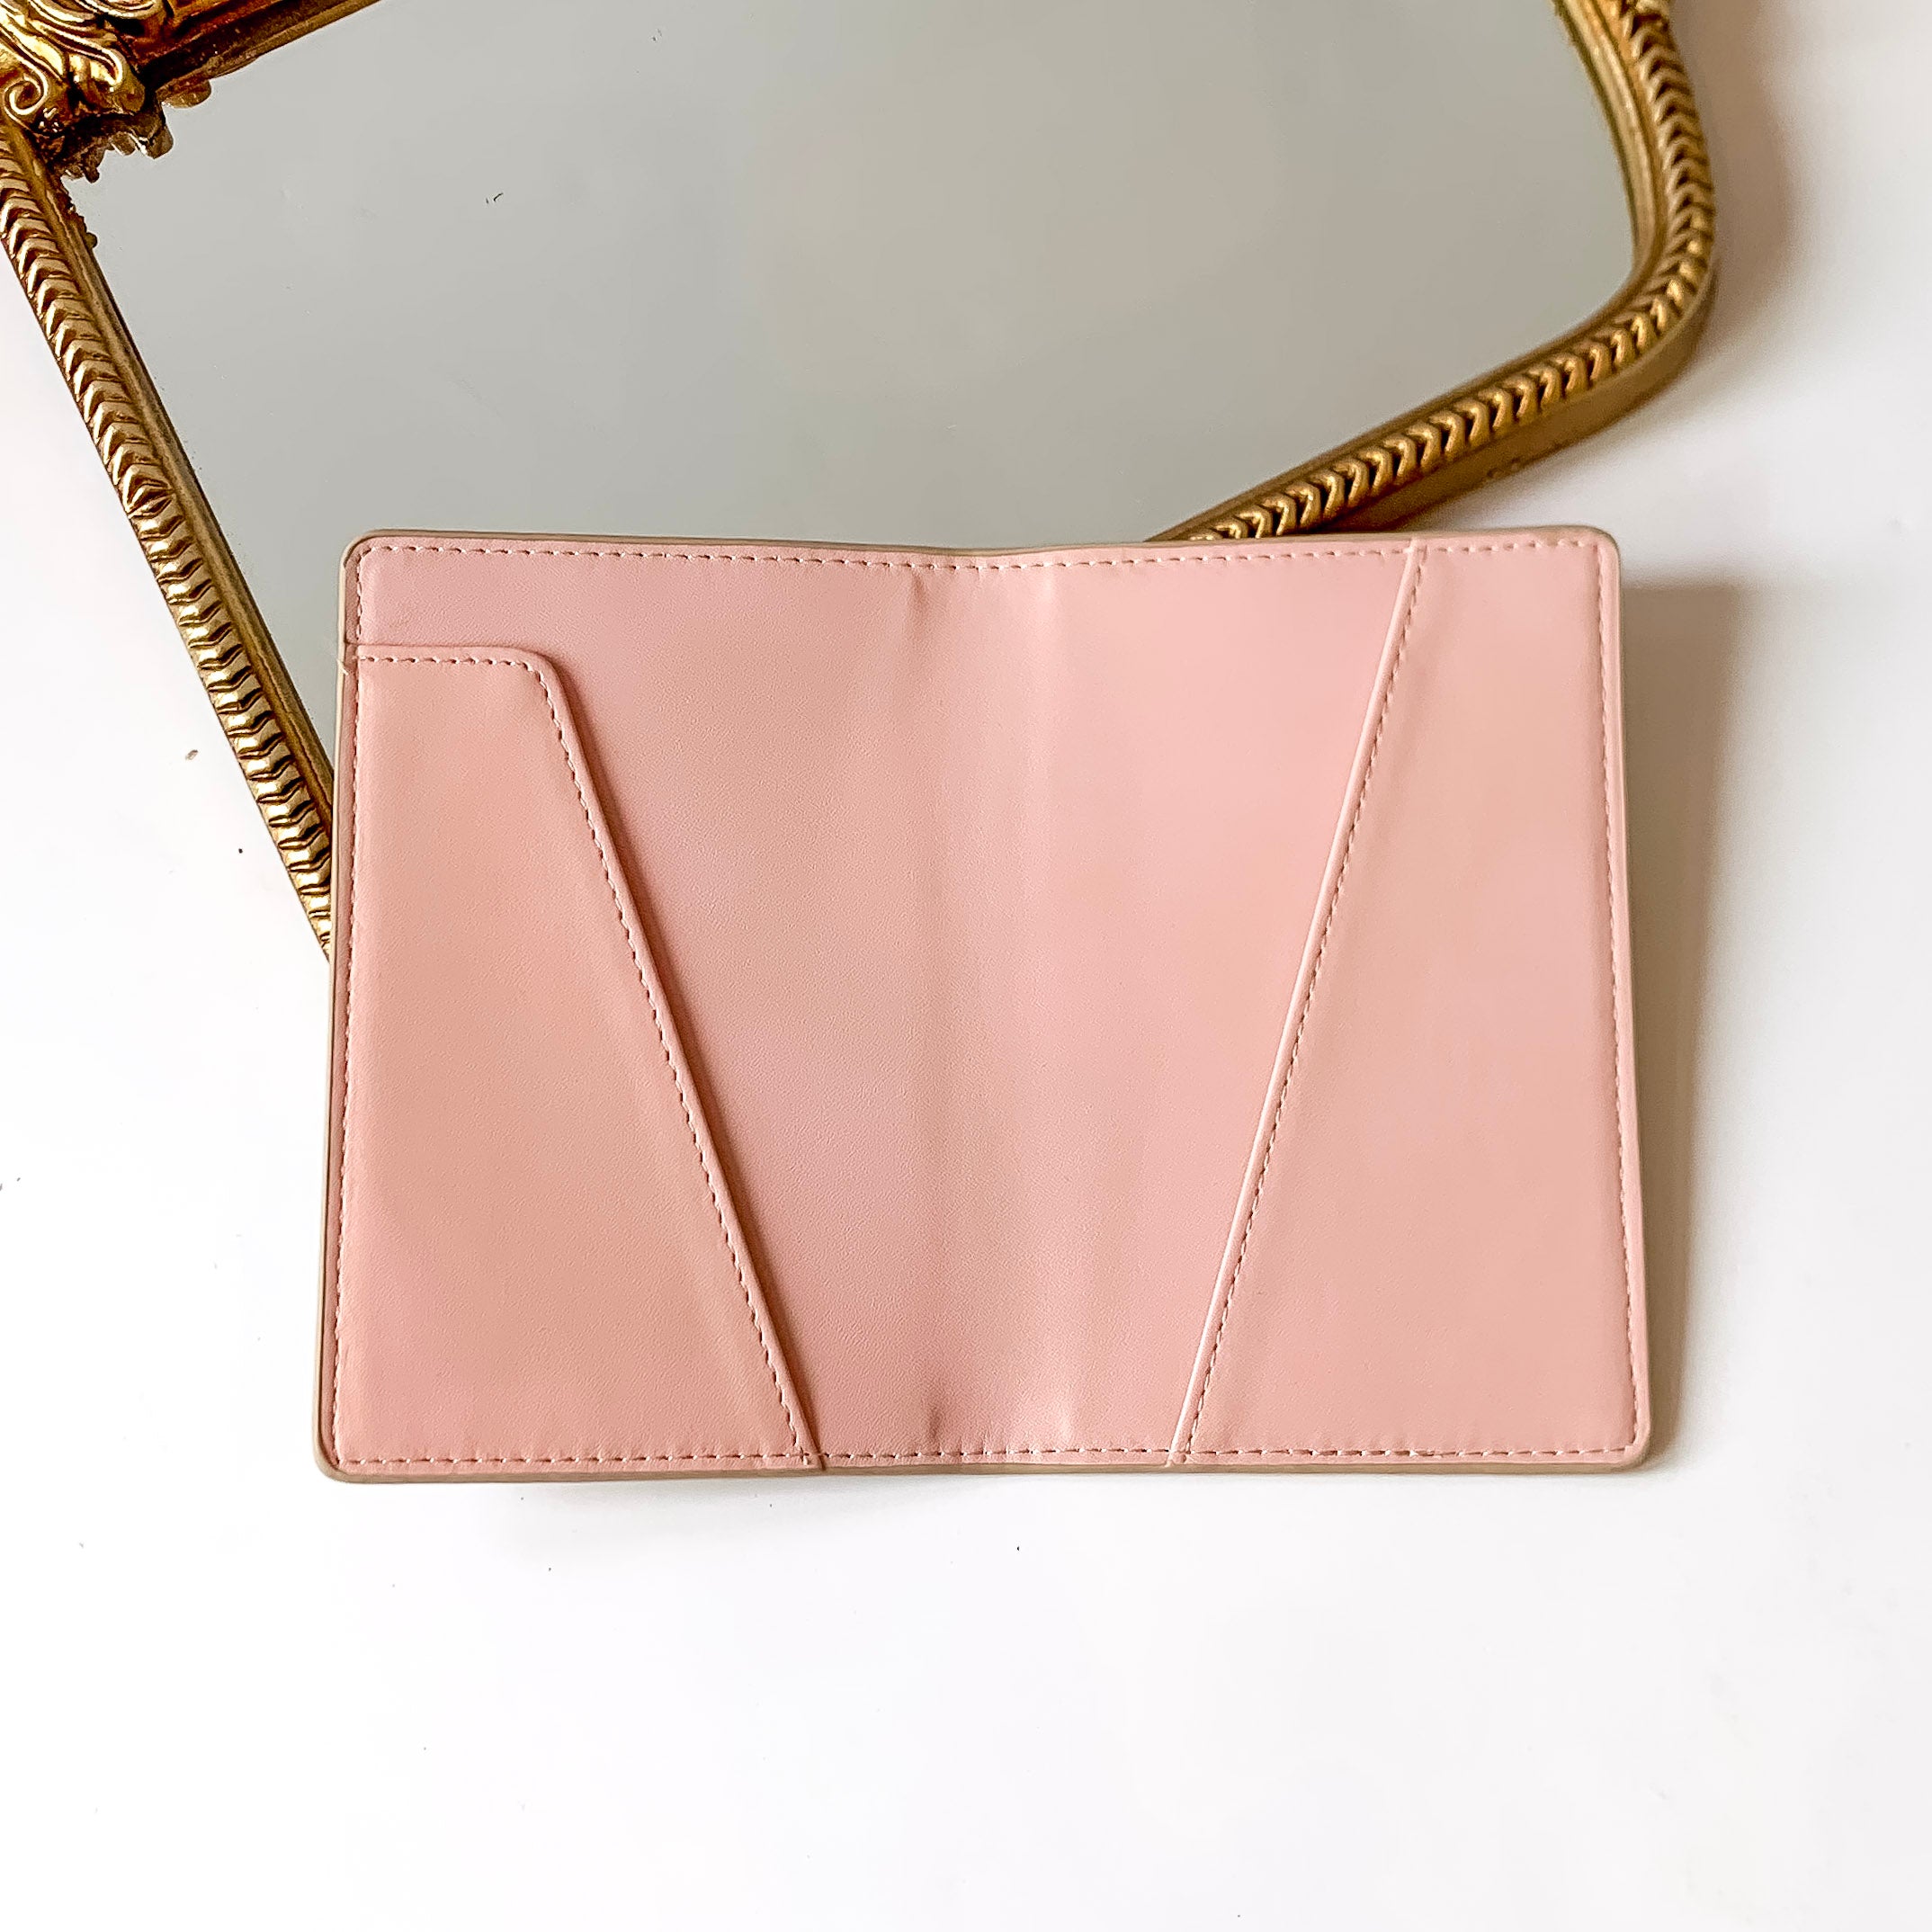 Hollis | Passport Holder in Nude - Giddy Up Glamour Boutique